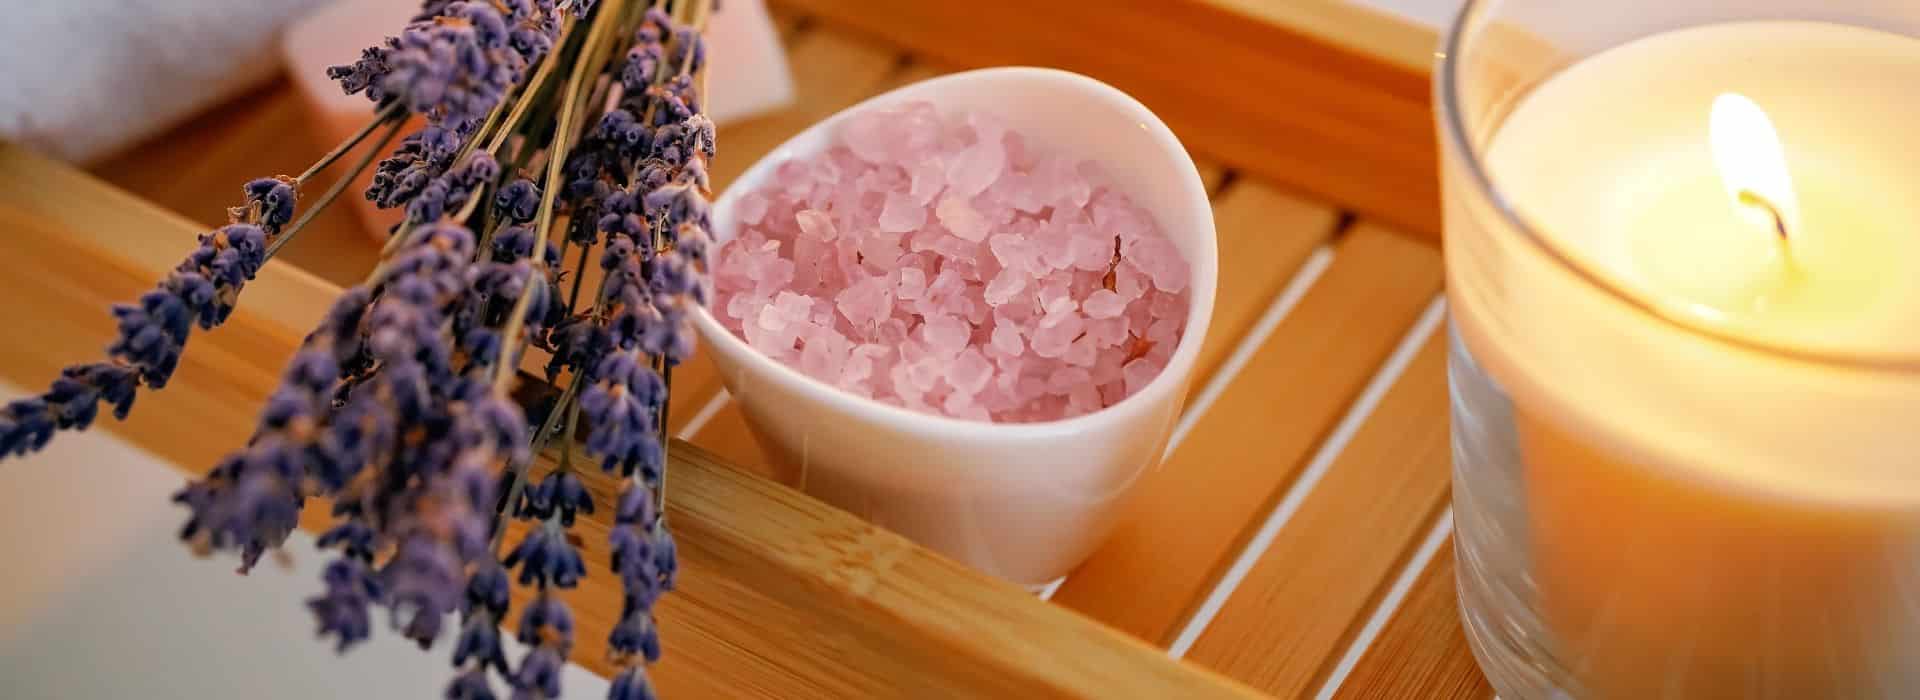 Lavender, pink salt and a lit candle on a bath tray | The Perfect Bath: Create the Ultimate Ritual Bathing Experience | Shine Body & Bath Blog